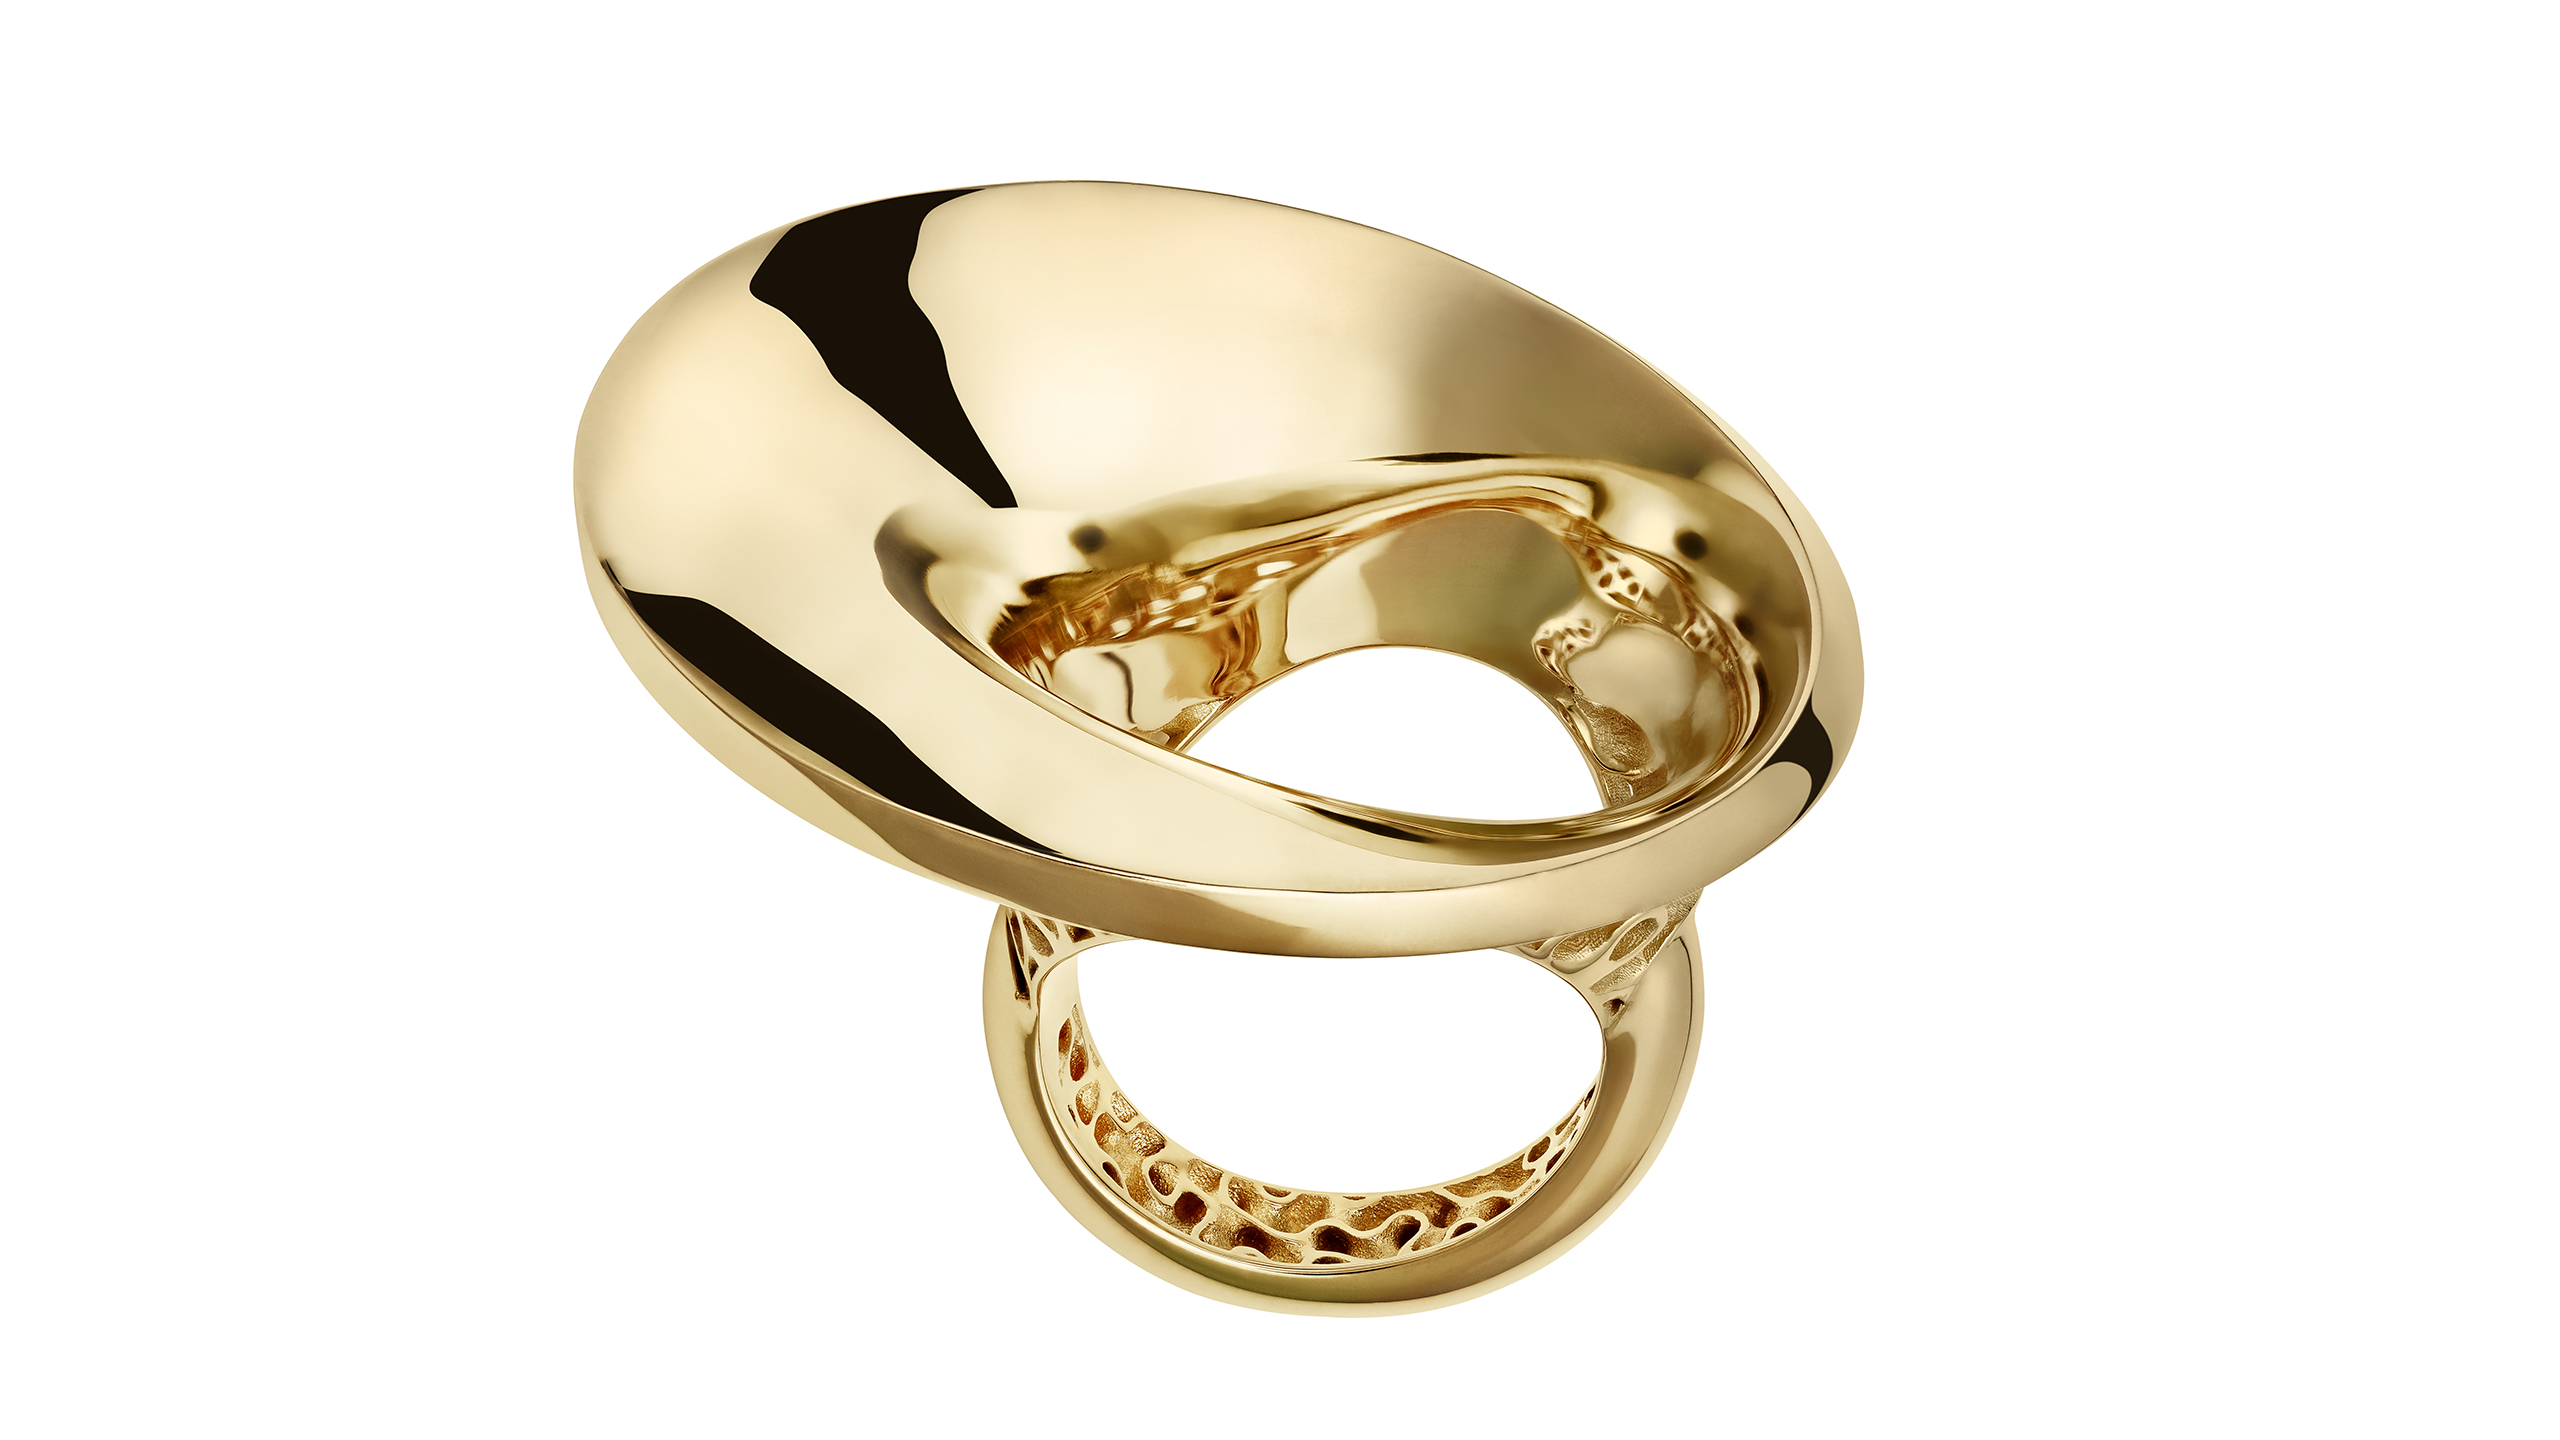 https://towejewels.com/wp-content/uploads/2021/12/Chanterelle_gold_ring_2560x1440_web.jpg